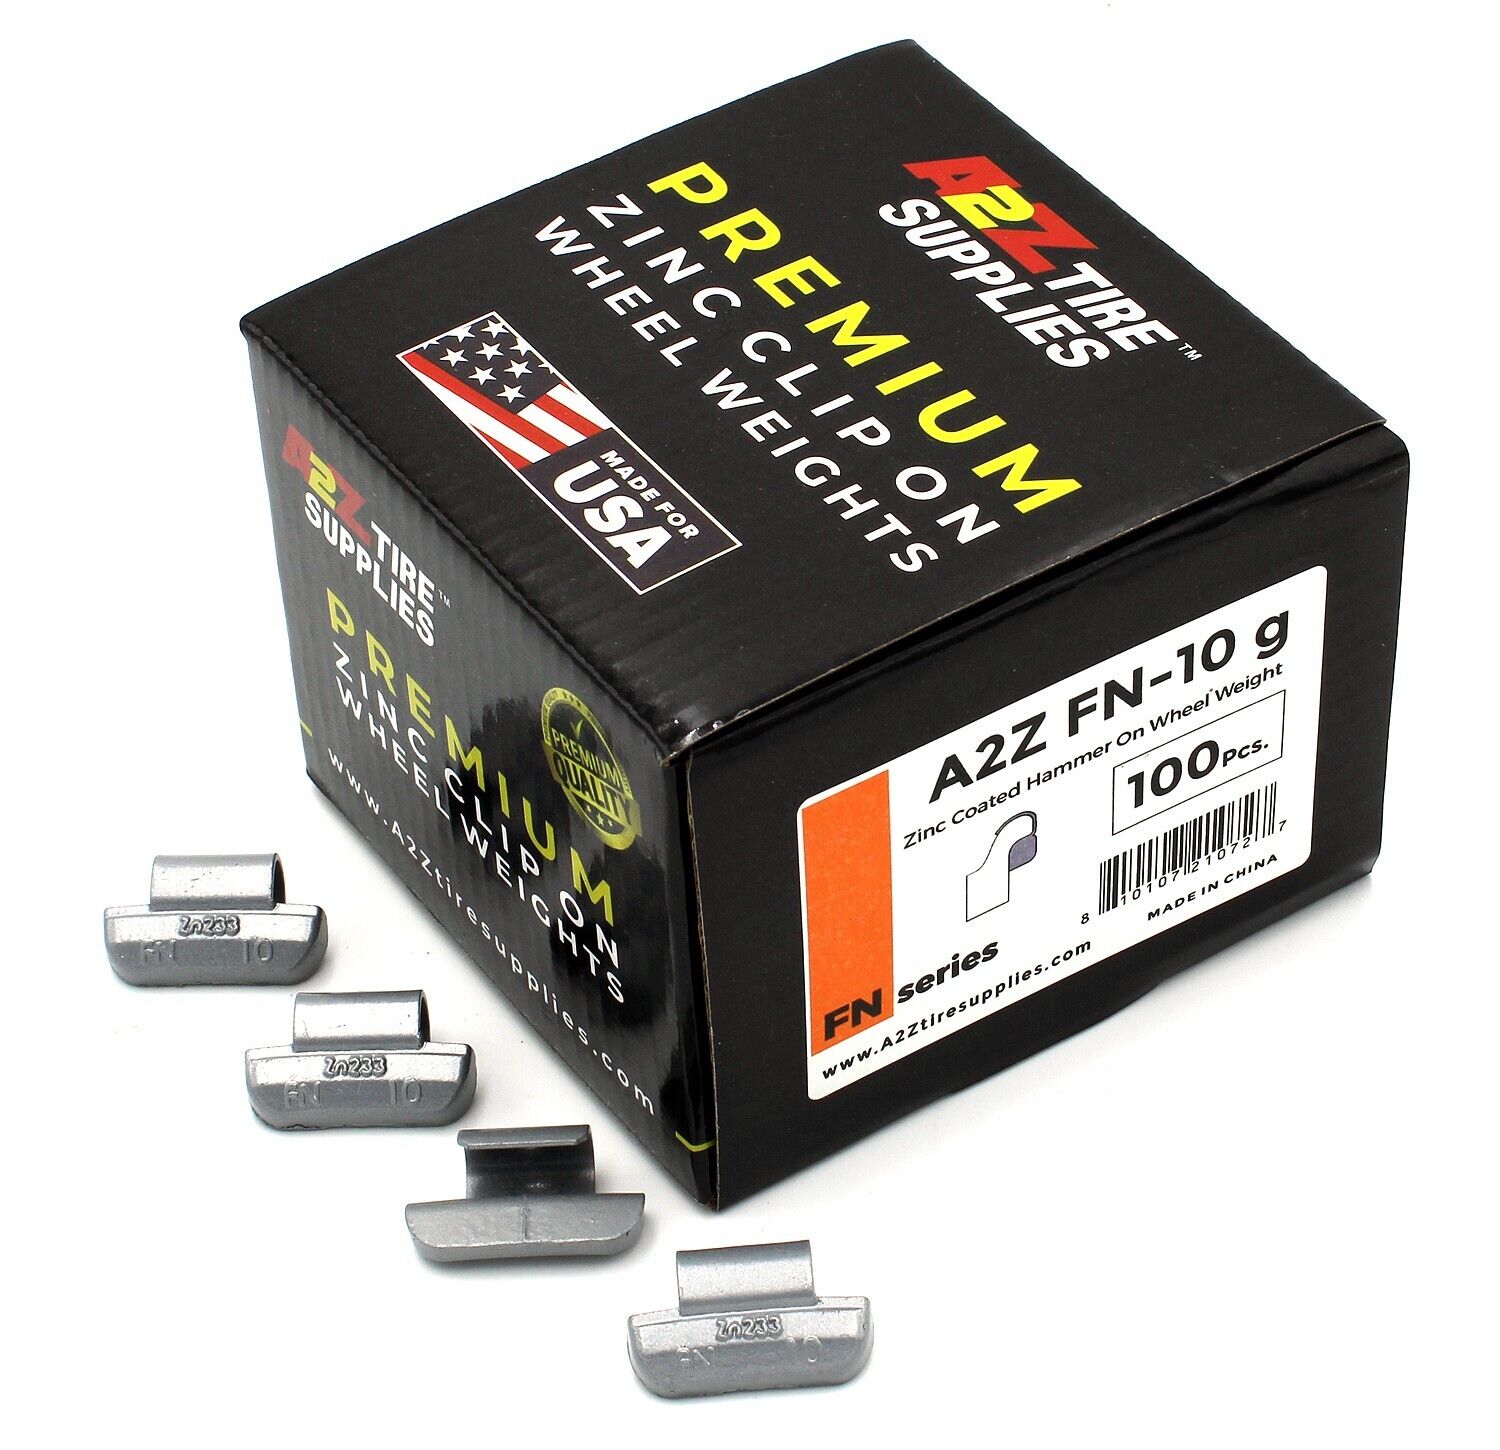 A2Z FN Series Hammer on ZINC Wheel Weights Coated (10 g) Box of 100pcs